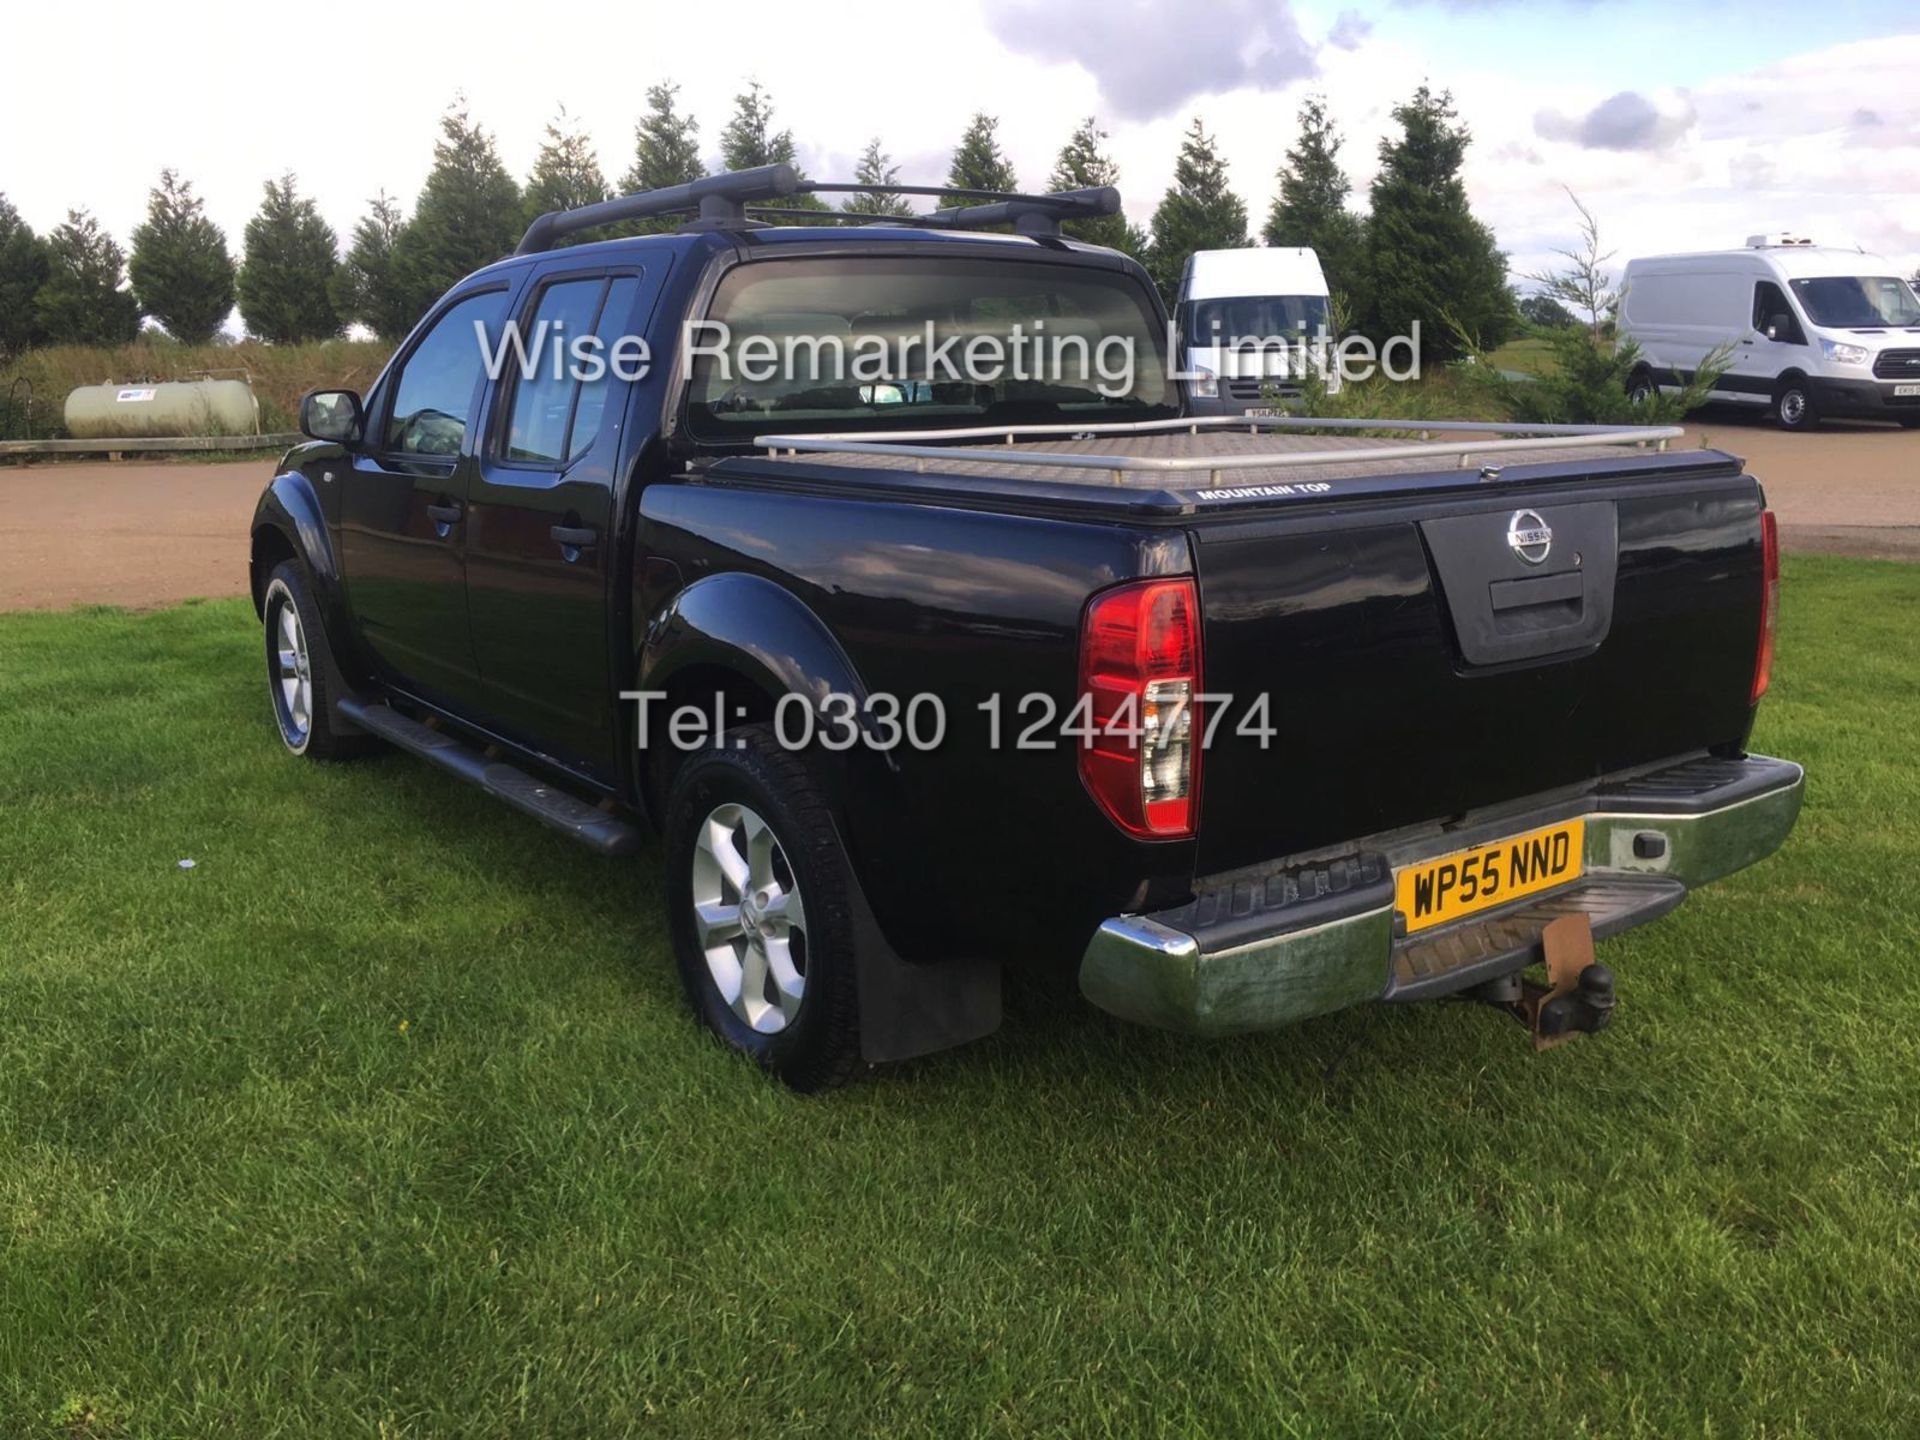 NISSAN NAVARA 2.5 DCI SE DOUBLE CAB PICK UP 4X4 (2006) LOADS OF HISTORY - Image 3 of 11